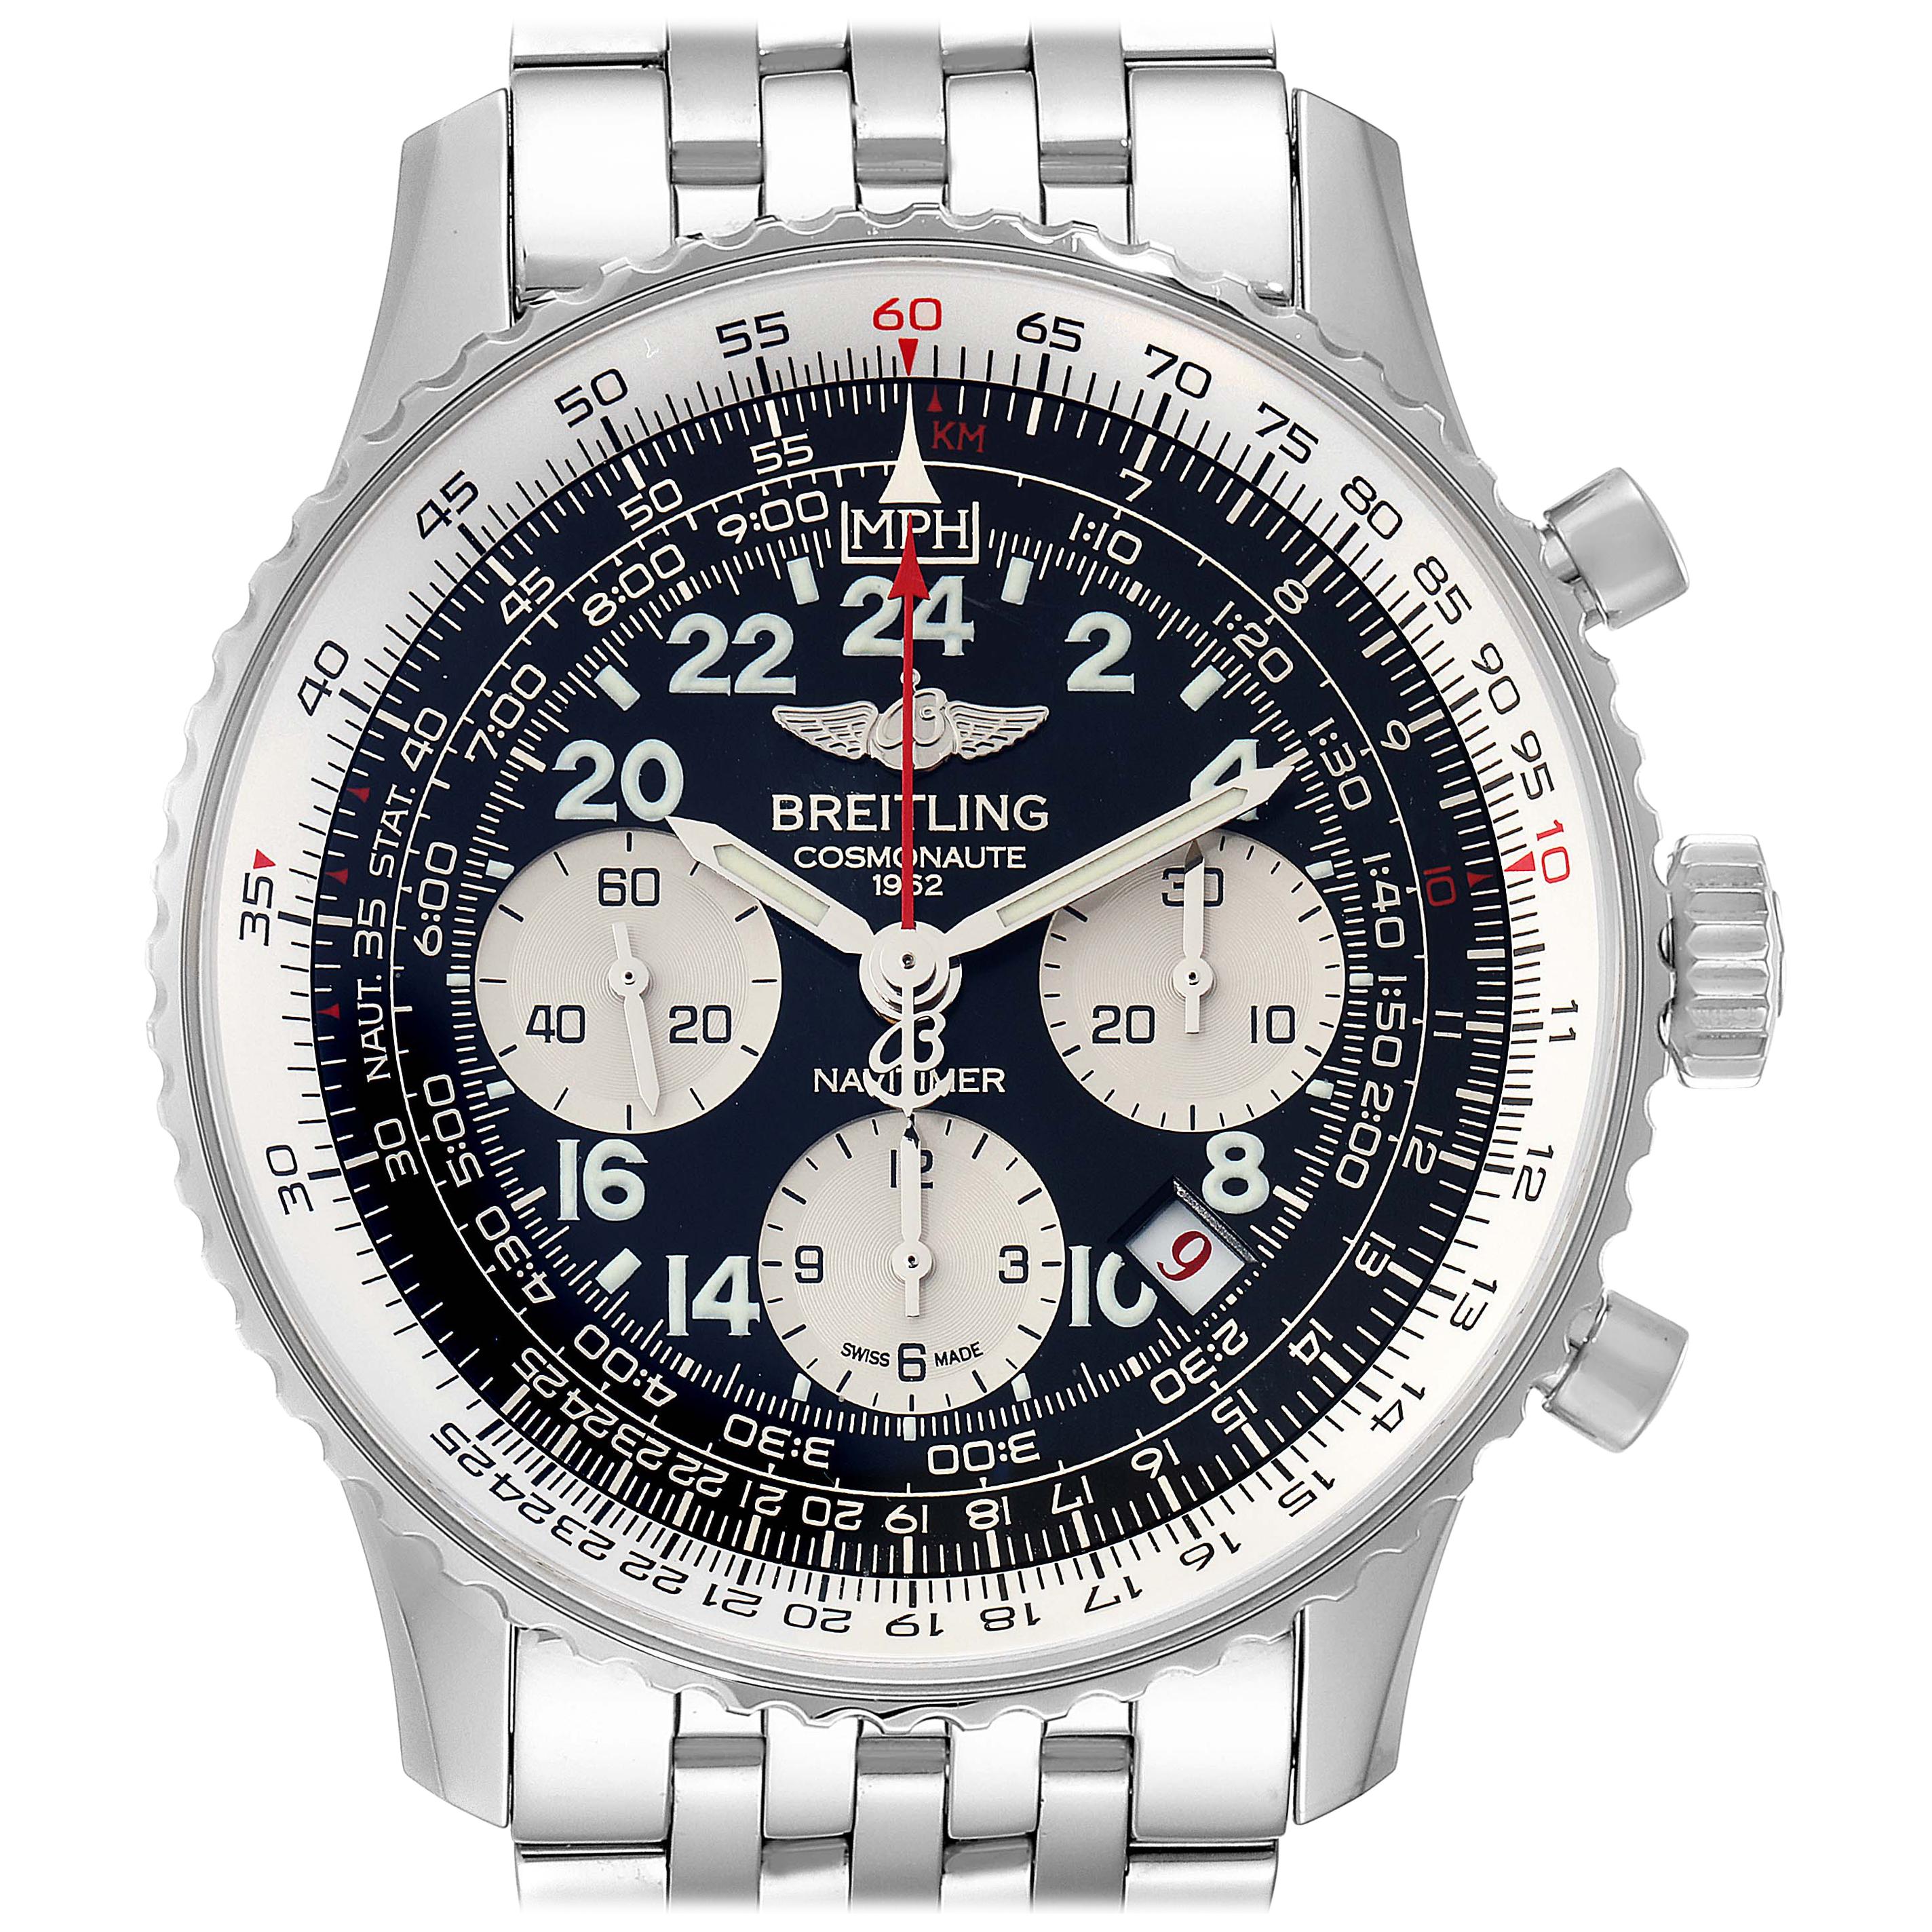 Breitling Navitimer Cosmonaute 02 Limited Edition Watch AB0210 Box Papers